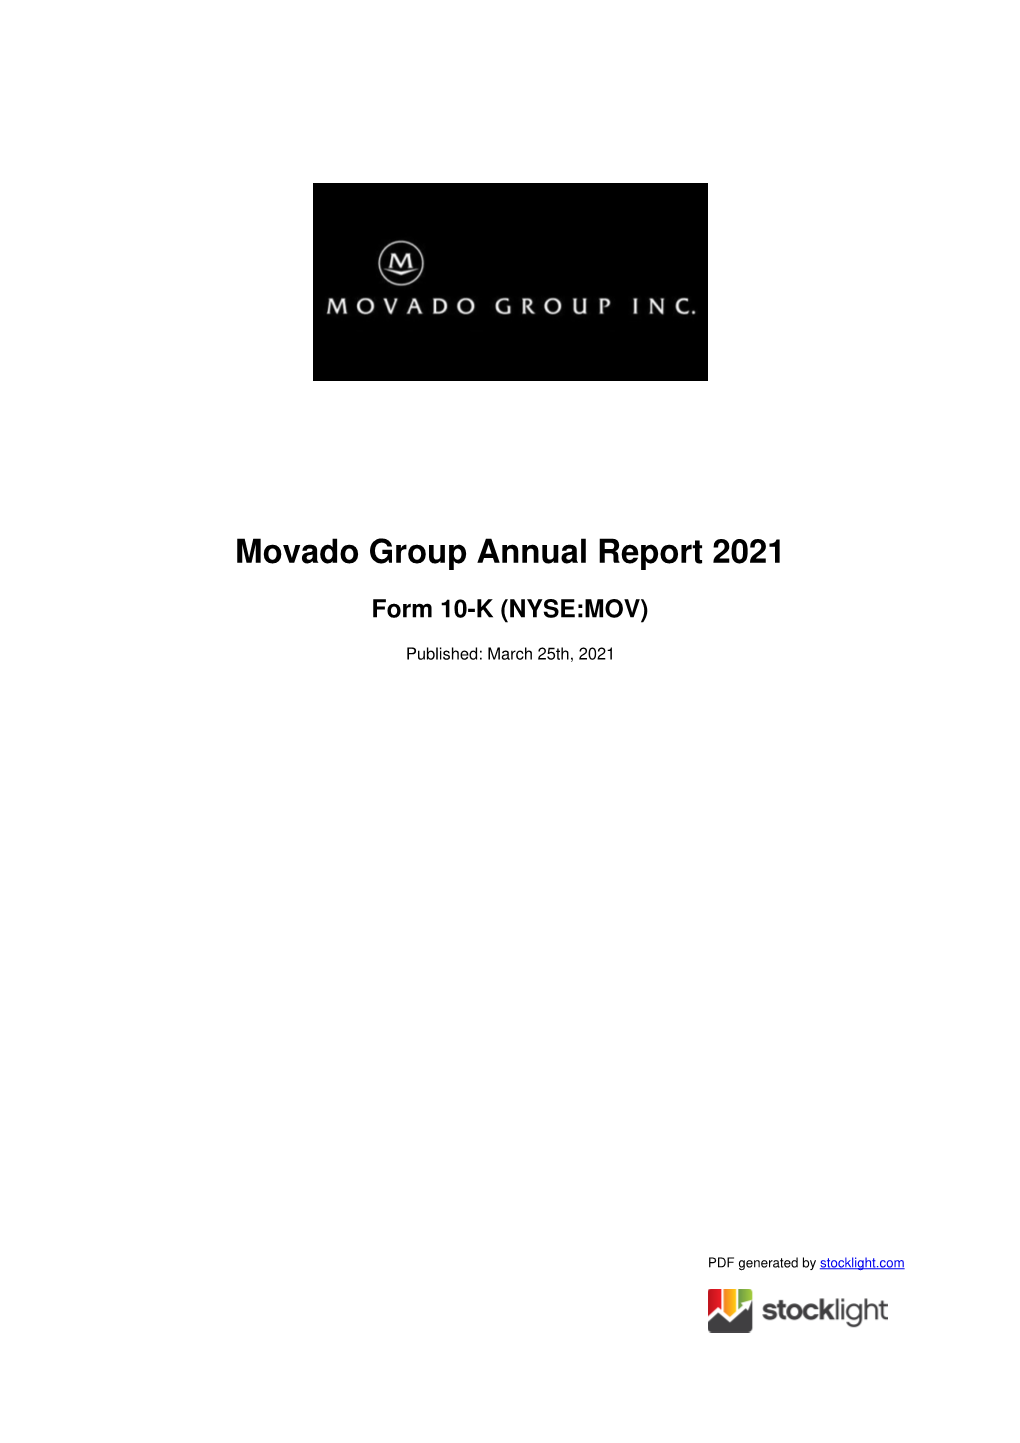 Movado Group Annual Report 2021